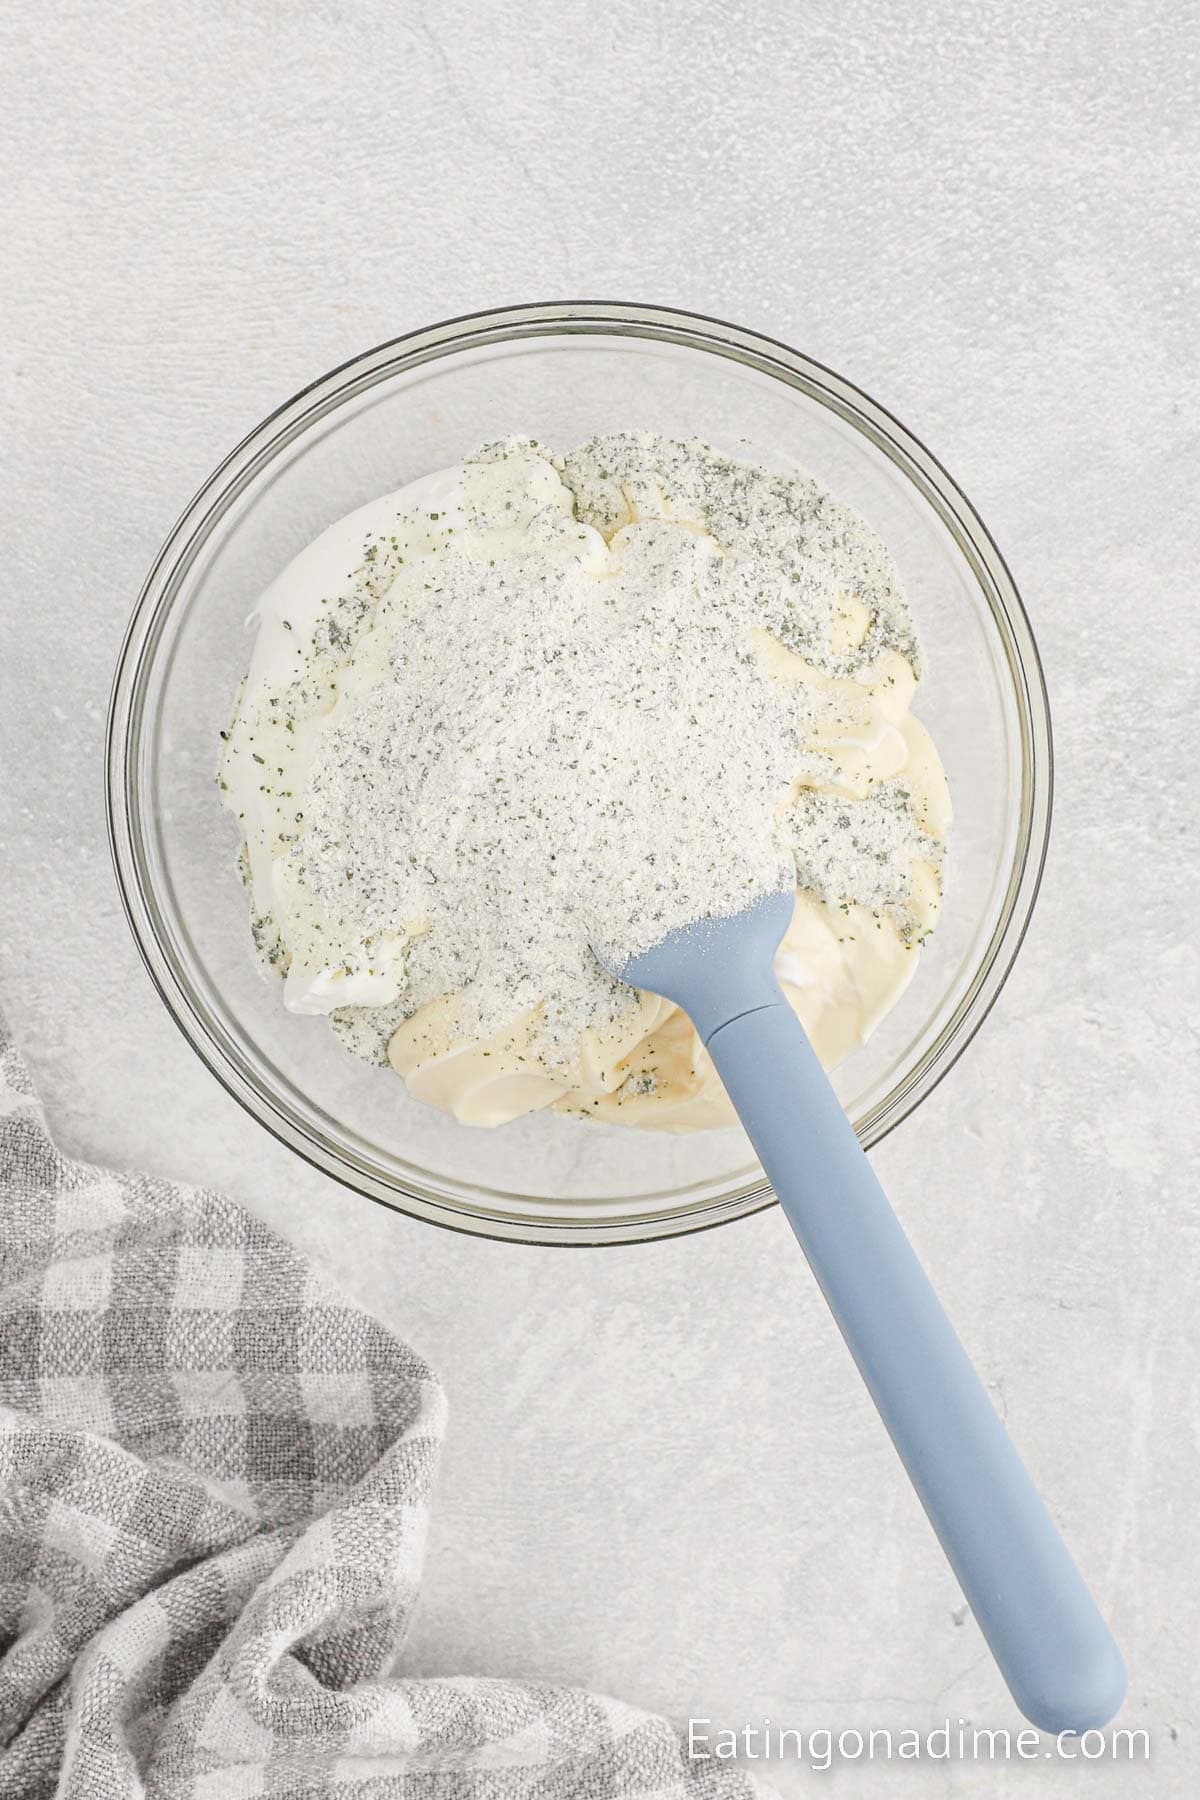 Combine the dressing ingredients together in a bowl with a spatula